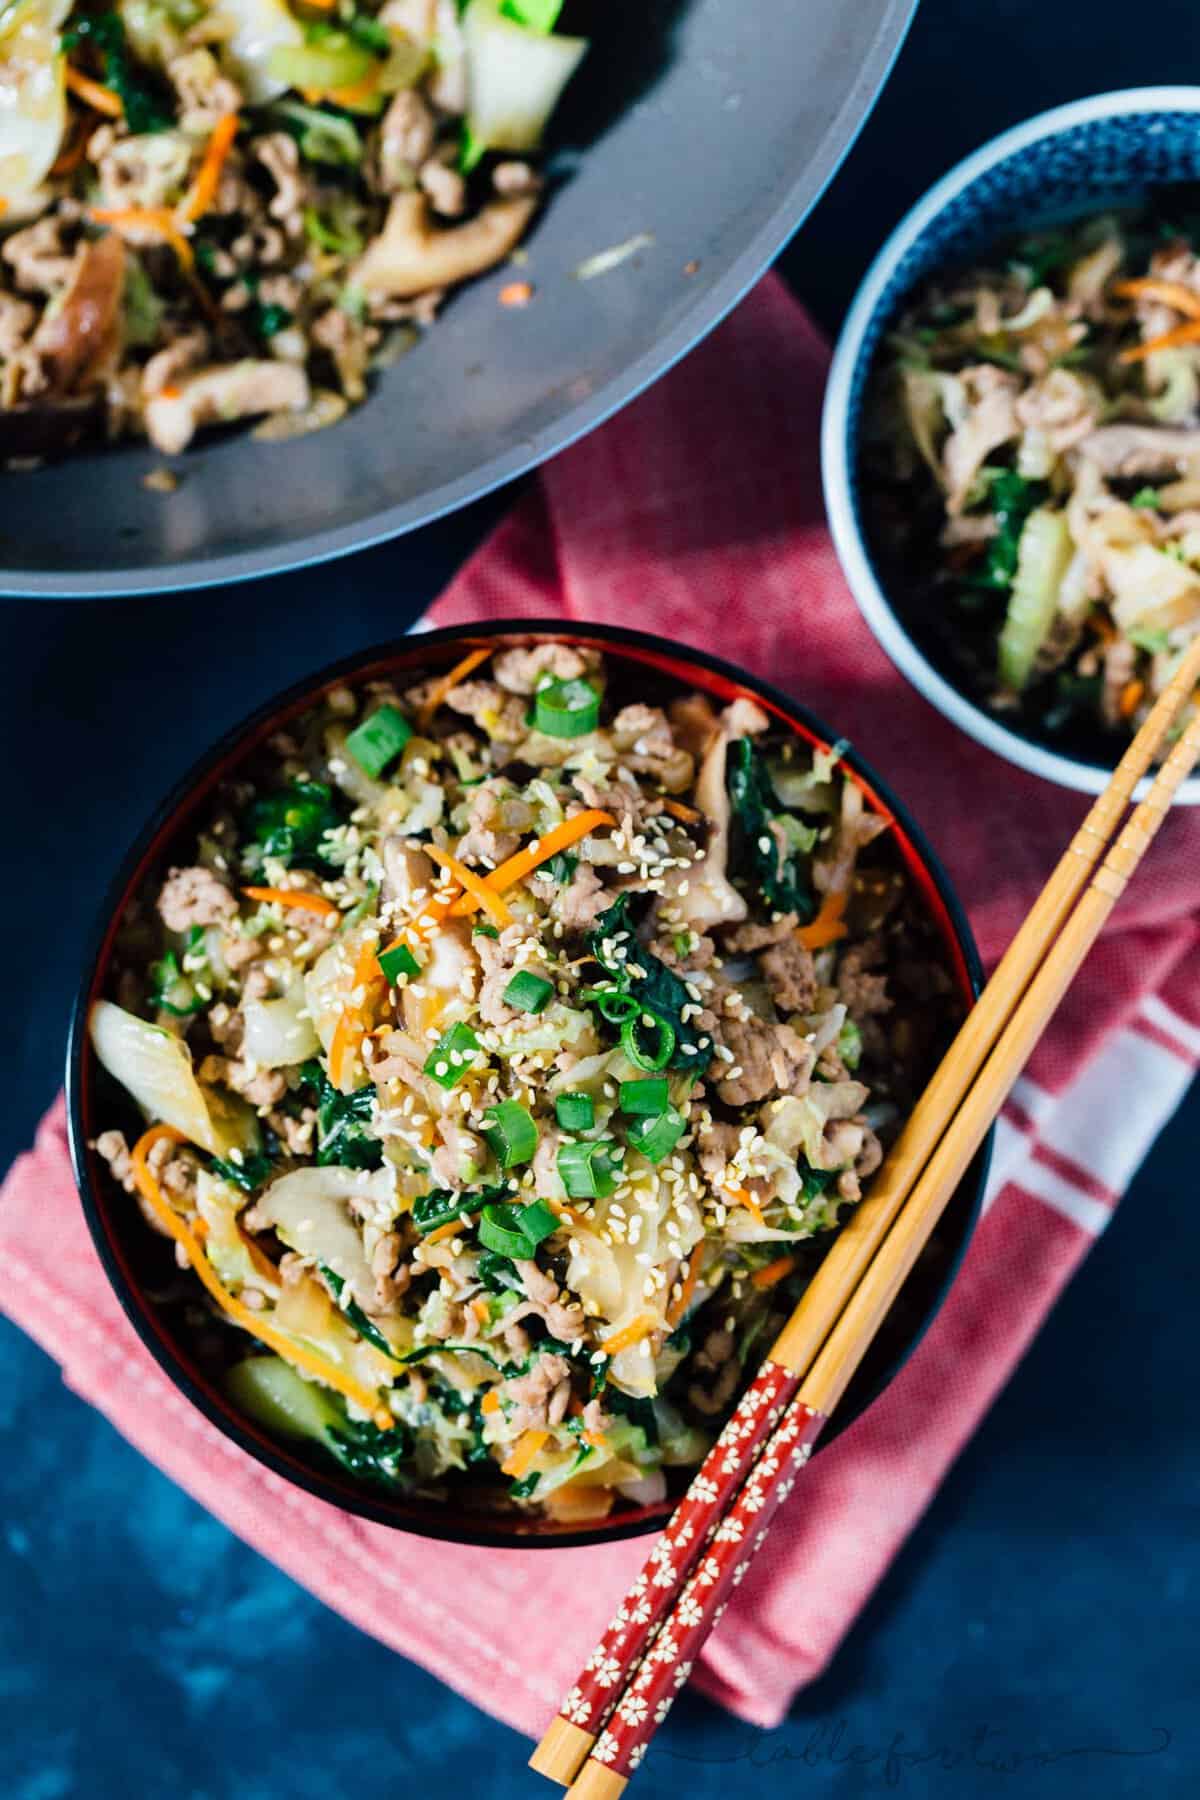 An eggroll in a bowl is your key to have all the eggroll filling you want! #eggrollbowl #eggroll #tablefortwoblog #chinesefood #asiancooking